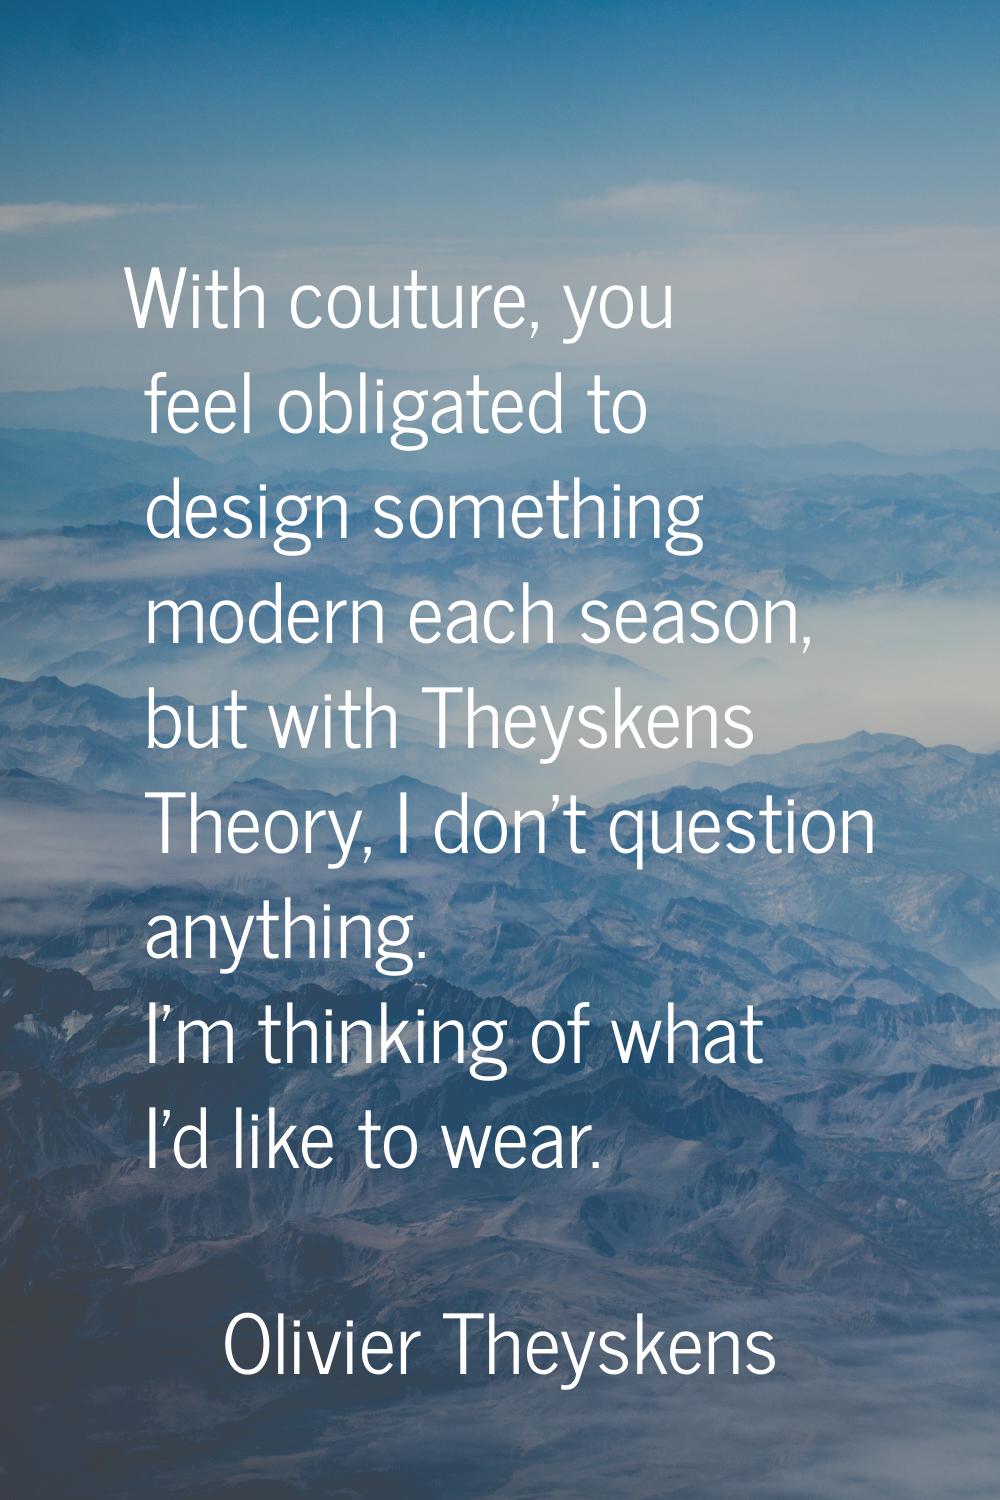 With couture, you feel obligated to design something modern each season, but with Theyskens Theory,